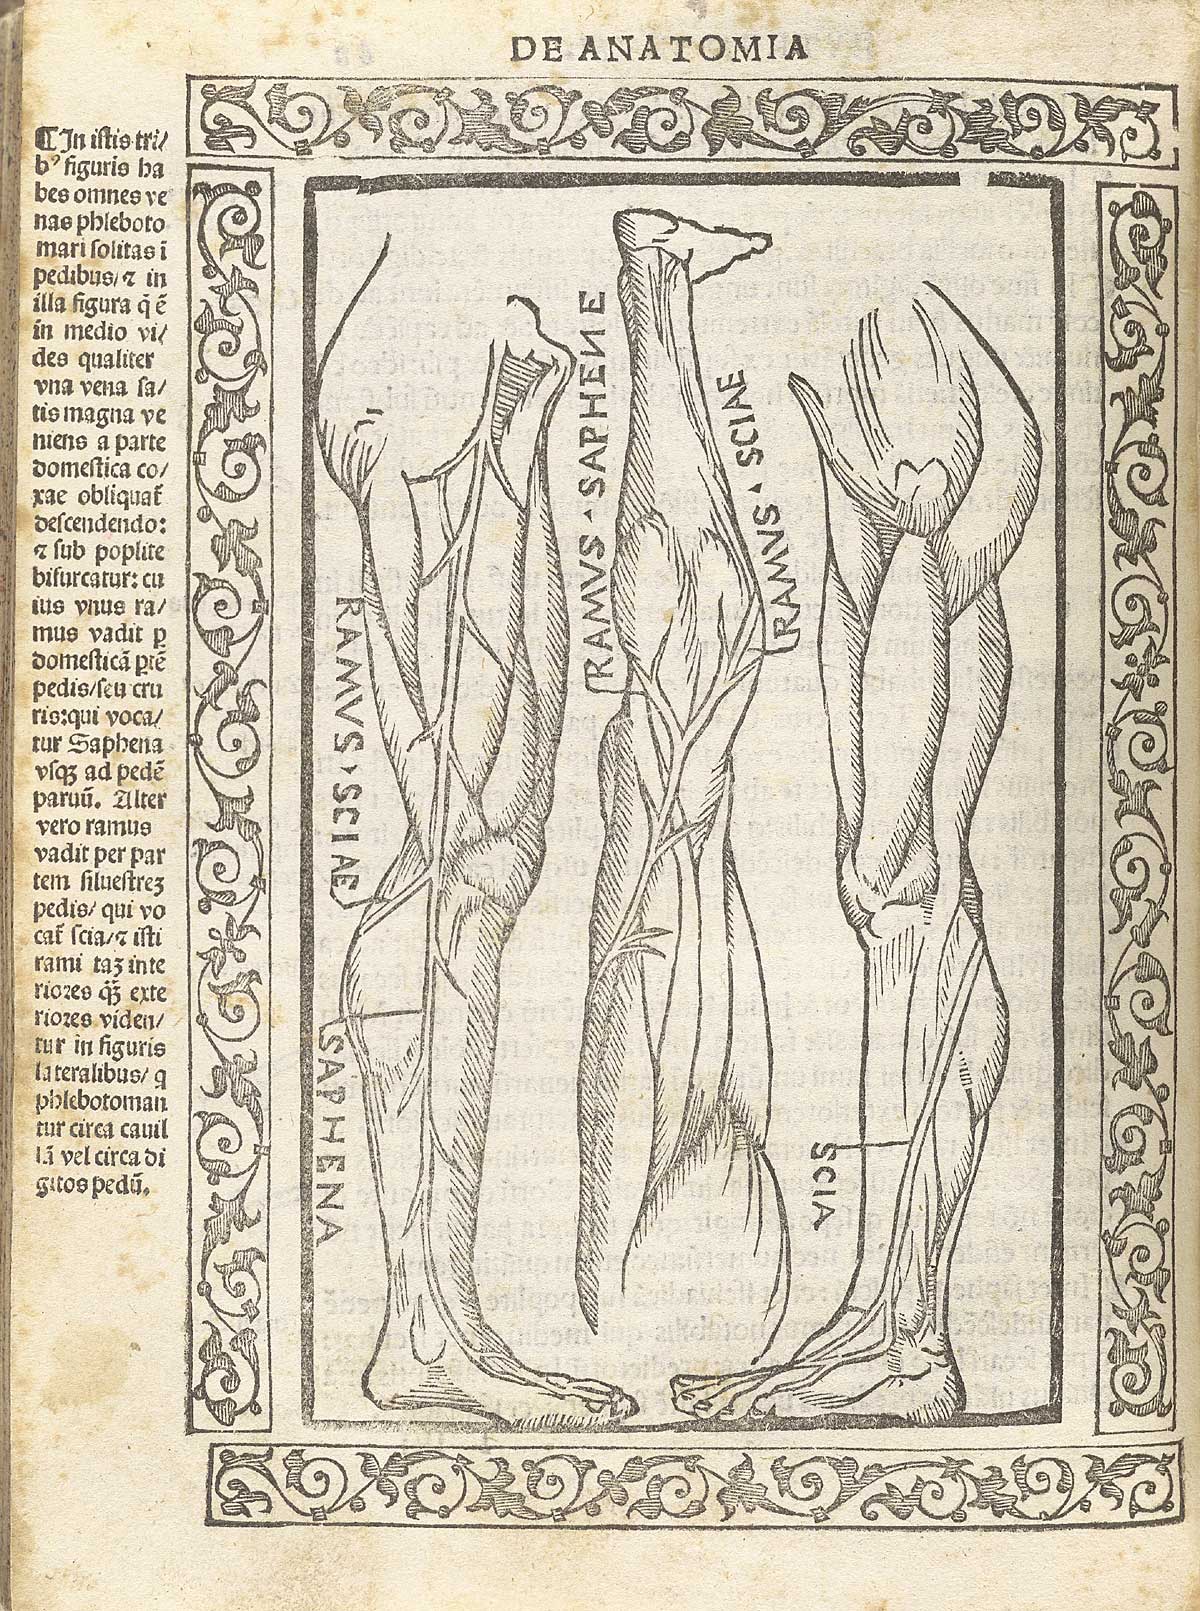 Three woodcut figures of the legss, side by, with special emphasis on the arteries, veins, and nerves; with a woodcut border and text in Latin on the left side of page, from Berengario da Carpi’s Isagogae breues, Bologna, 1523, NLM Call no. WZ 240 B488i 1523.